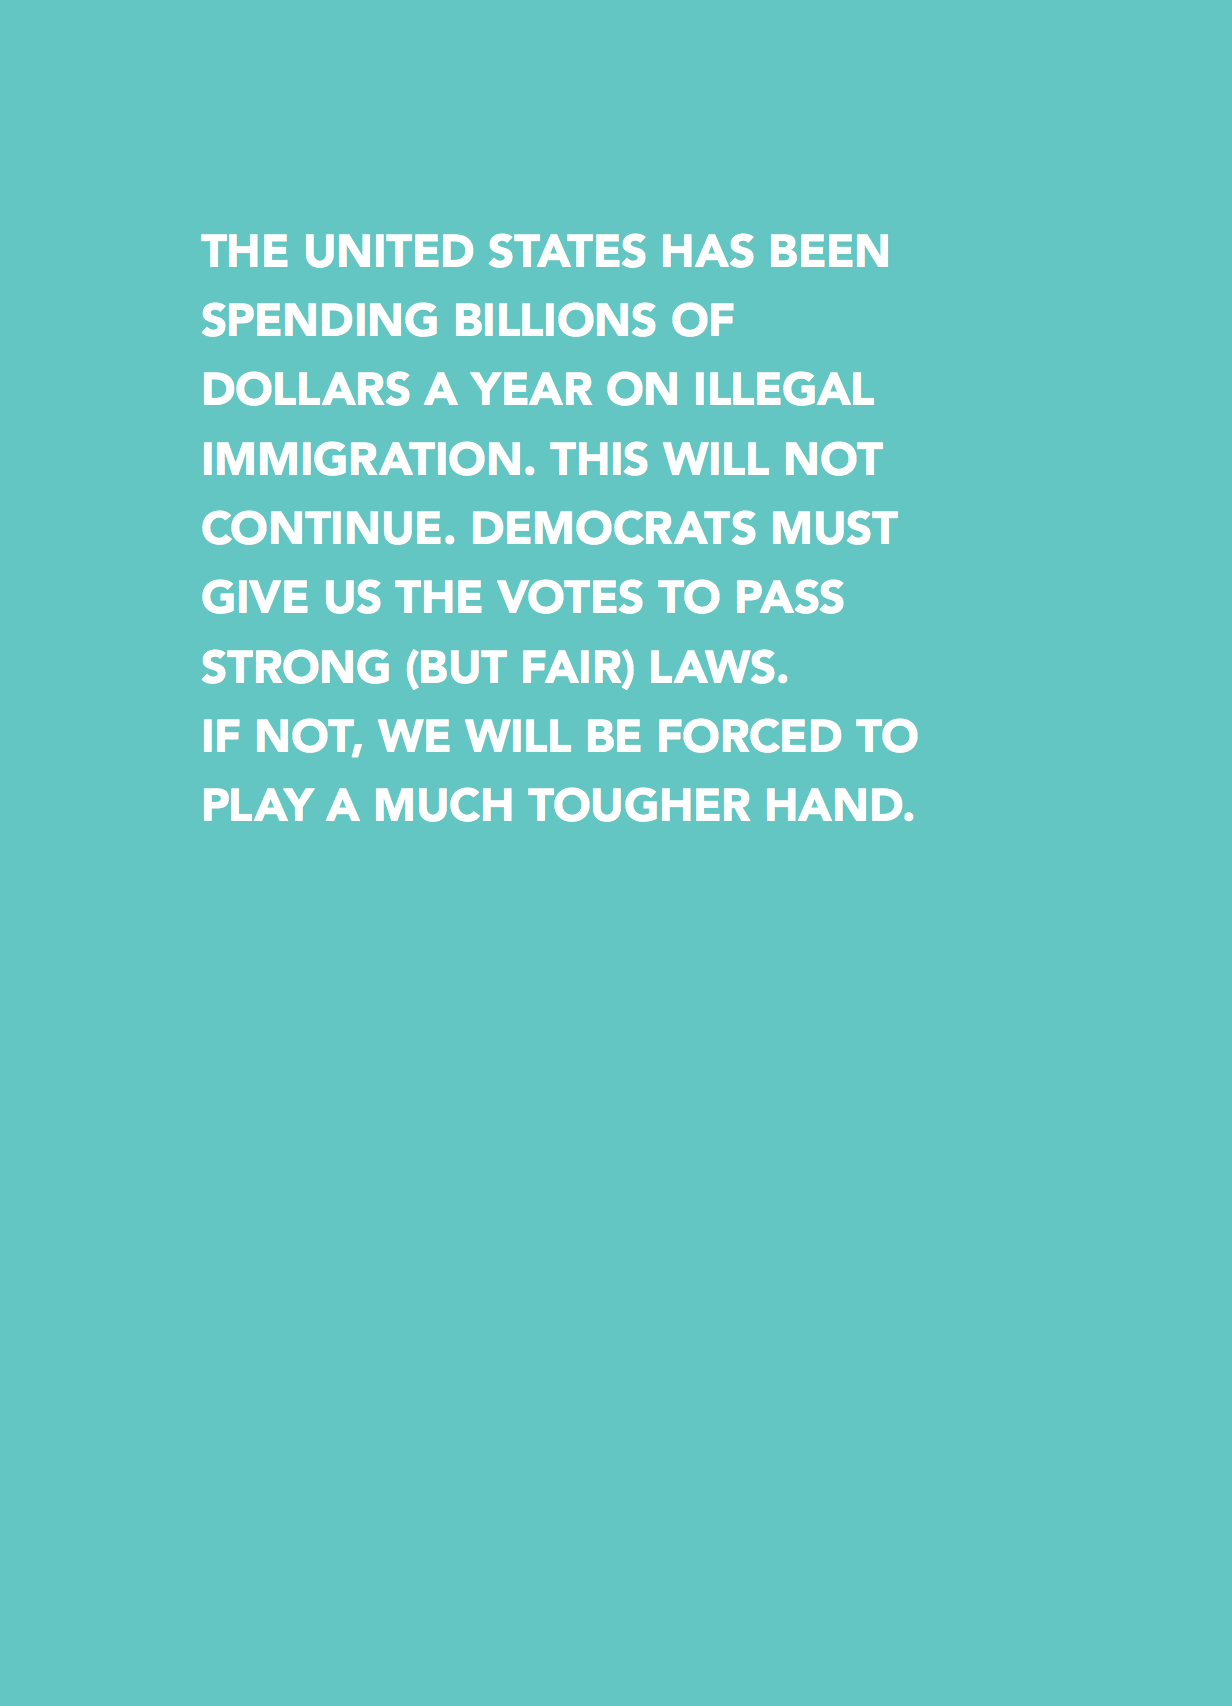 The United States has been spending Billions of  Dollars a year on Illegal  Immigration. This will not  continue. Democrats must  give us the votes to pass  strong (but fair) laws.  If not, we will be forced to play a much tougher hand.